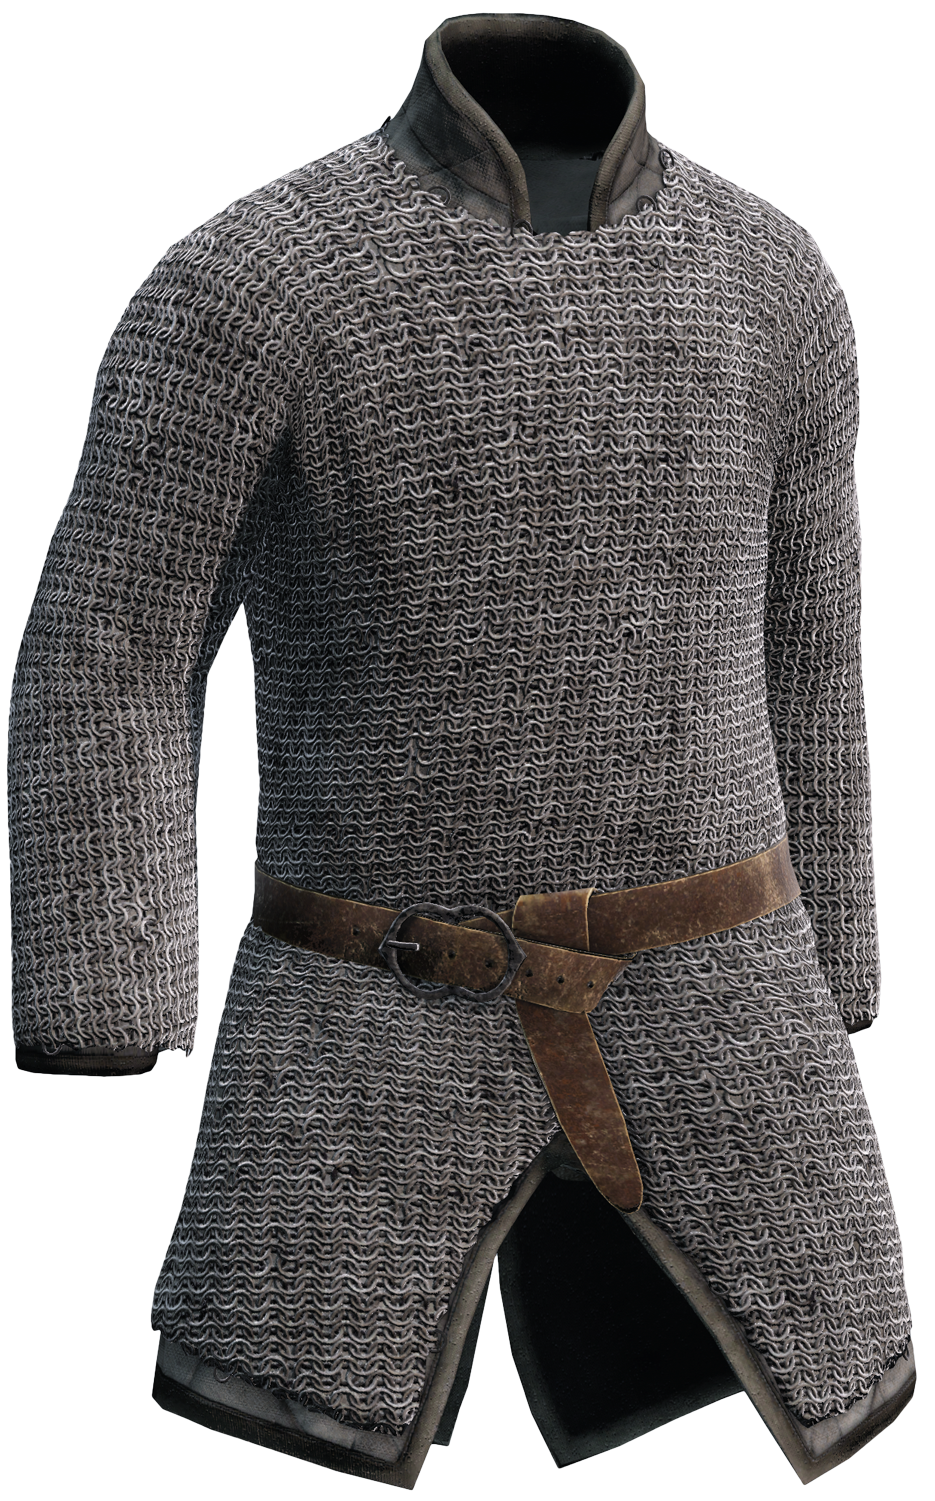 https://static.wikia.nocookie.net/dayz_gamepedia/images/e/e5/Chainmail.png/revision/latest?cb=20230702104736